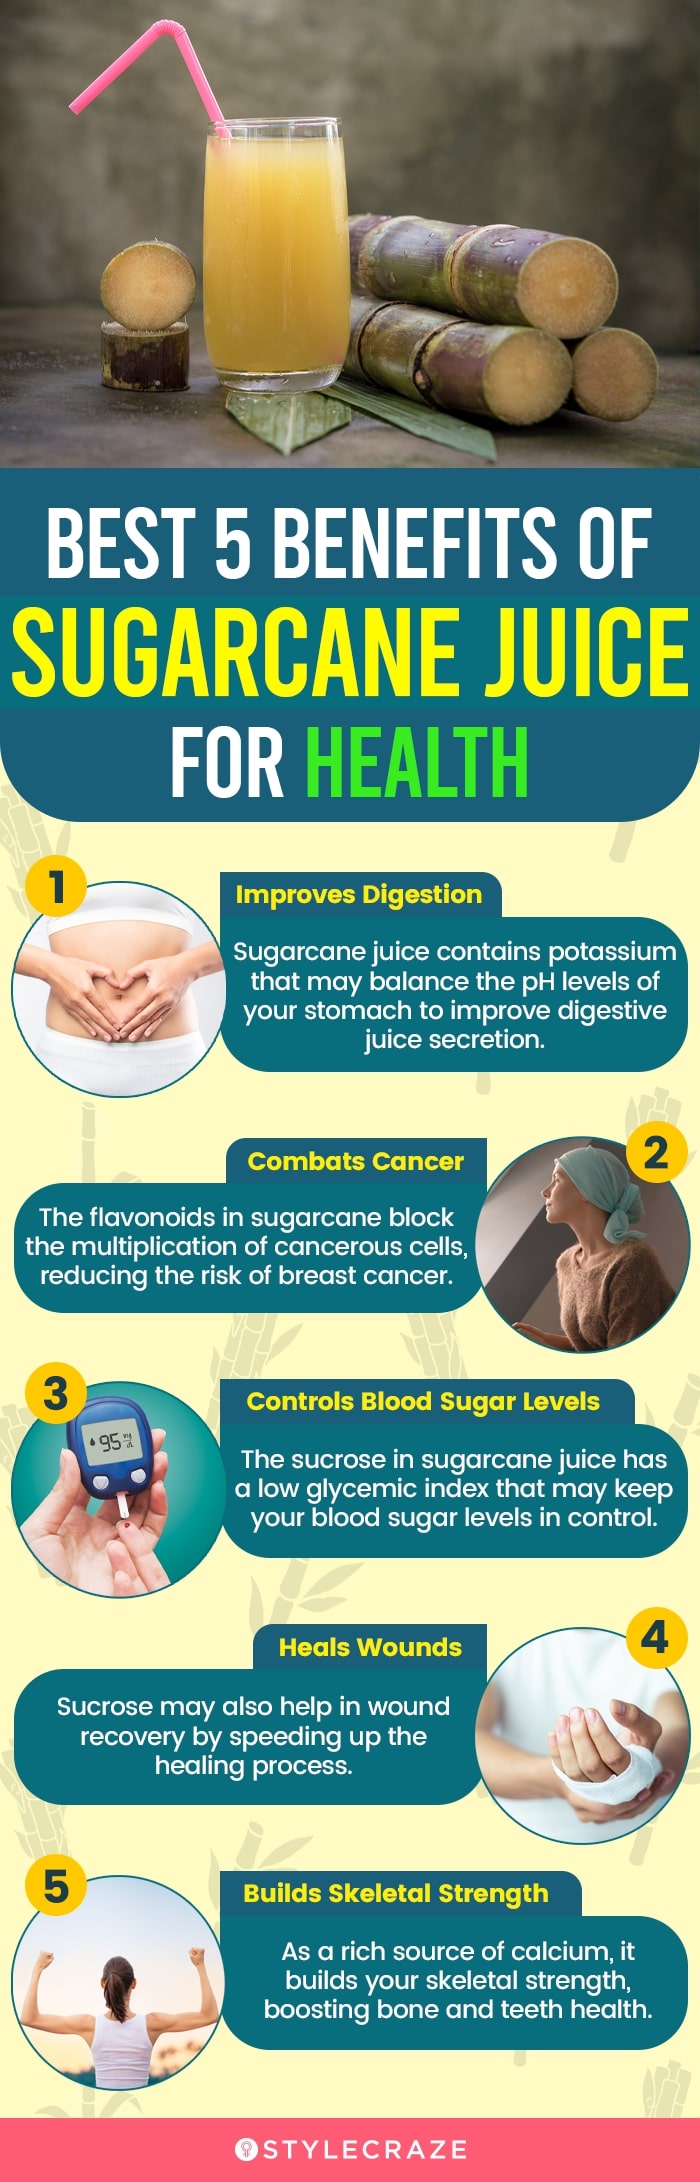 best 5 benefits of sugarcane juice for health (infographic)